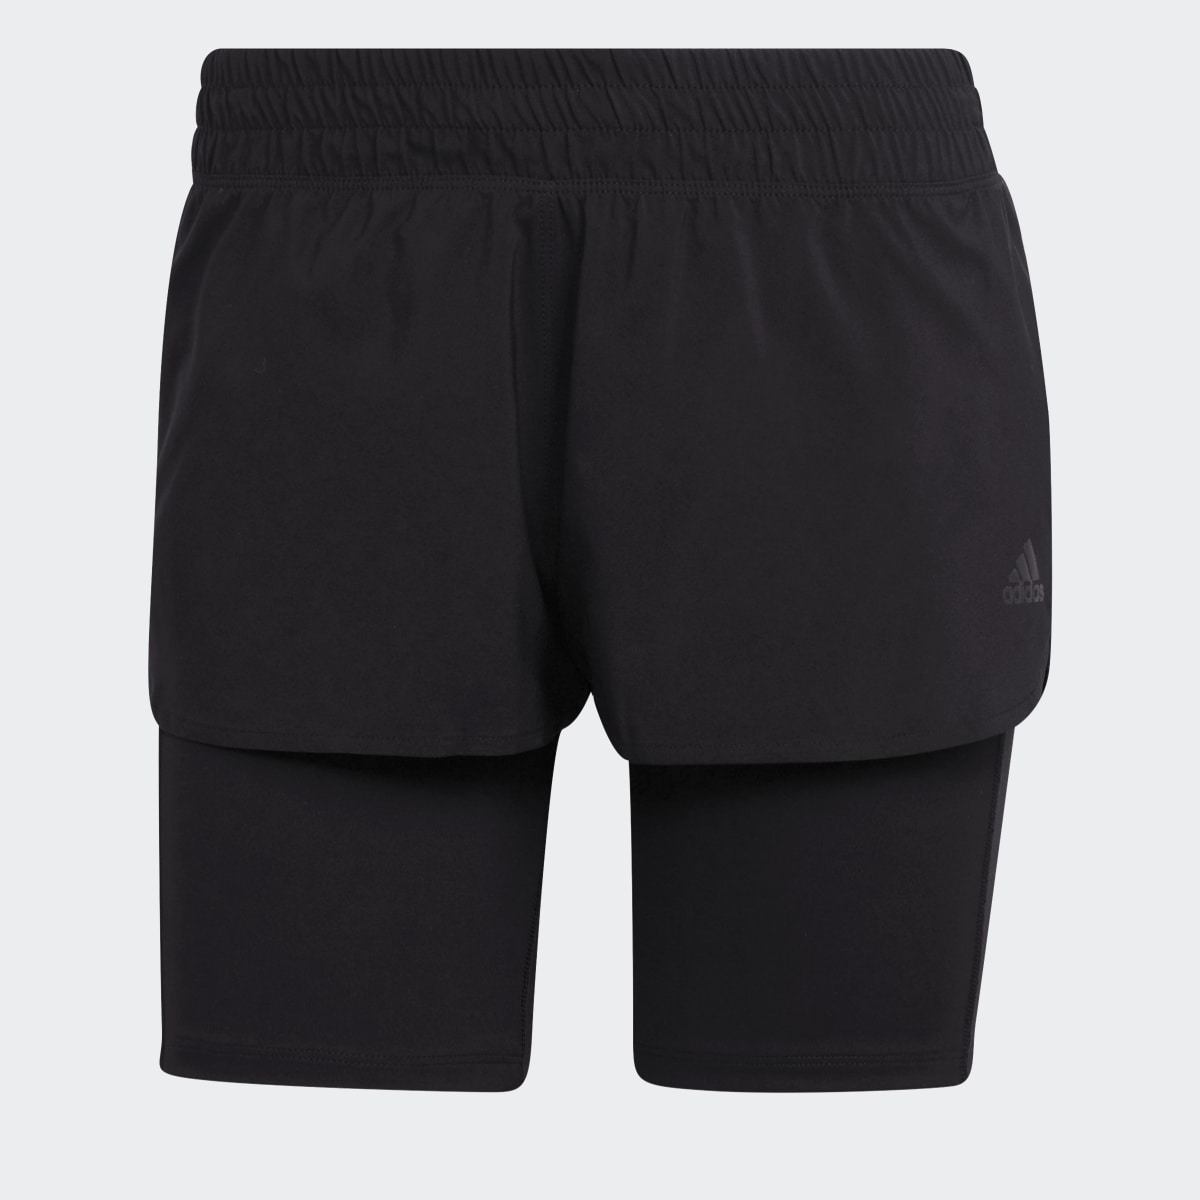 Adidas Run Icons Two-in-One Running Shorts. 4